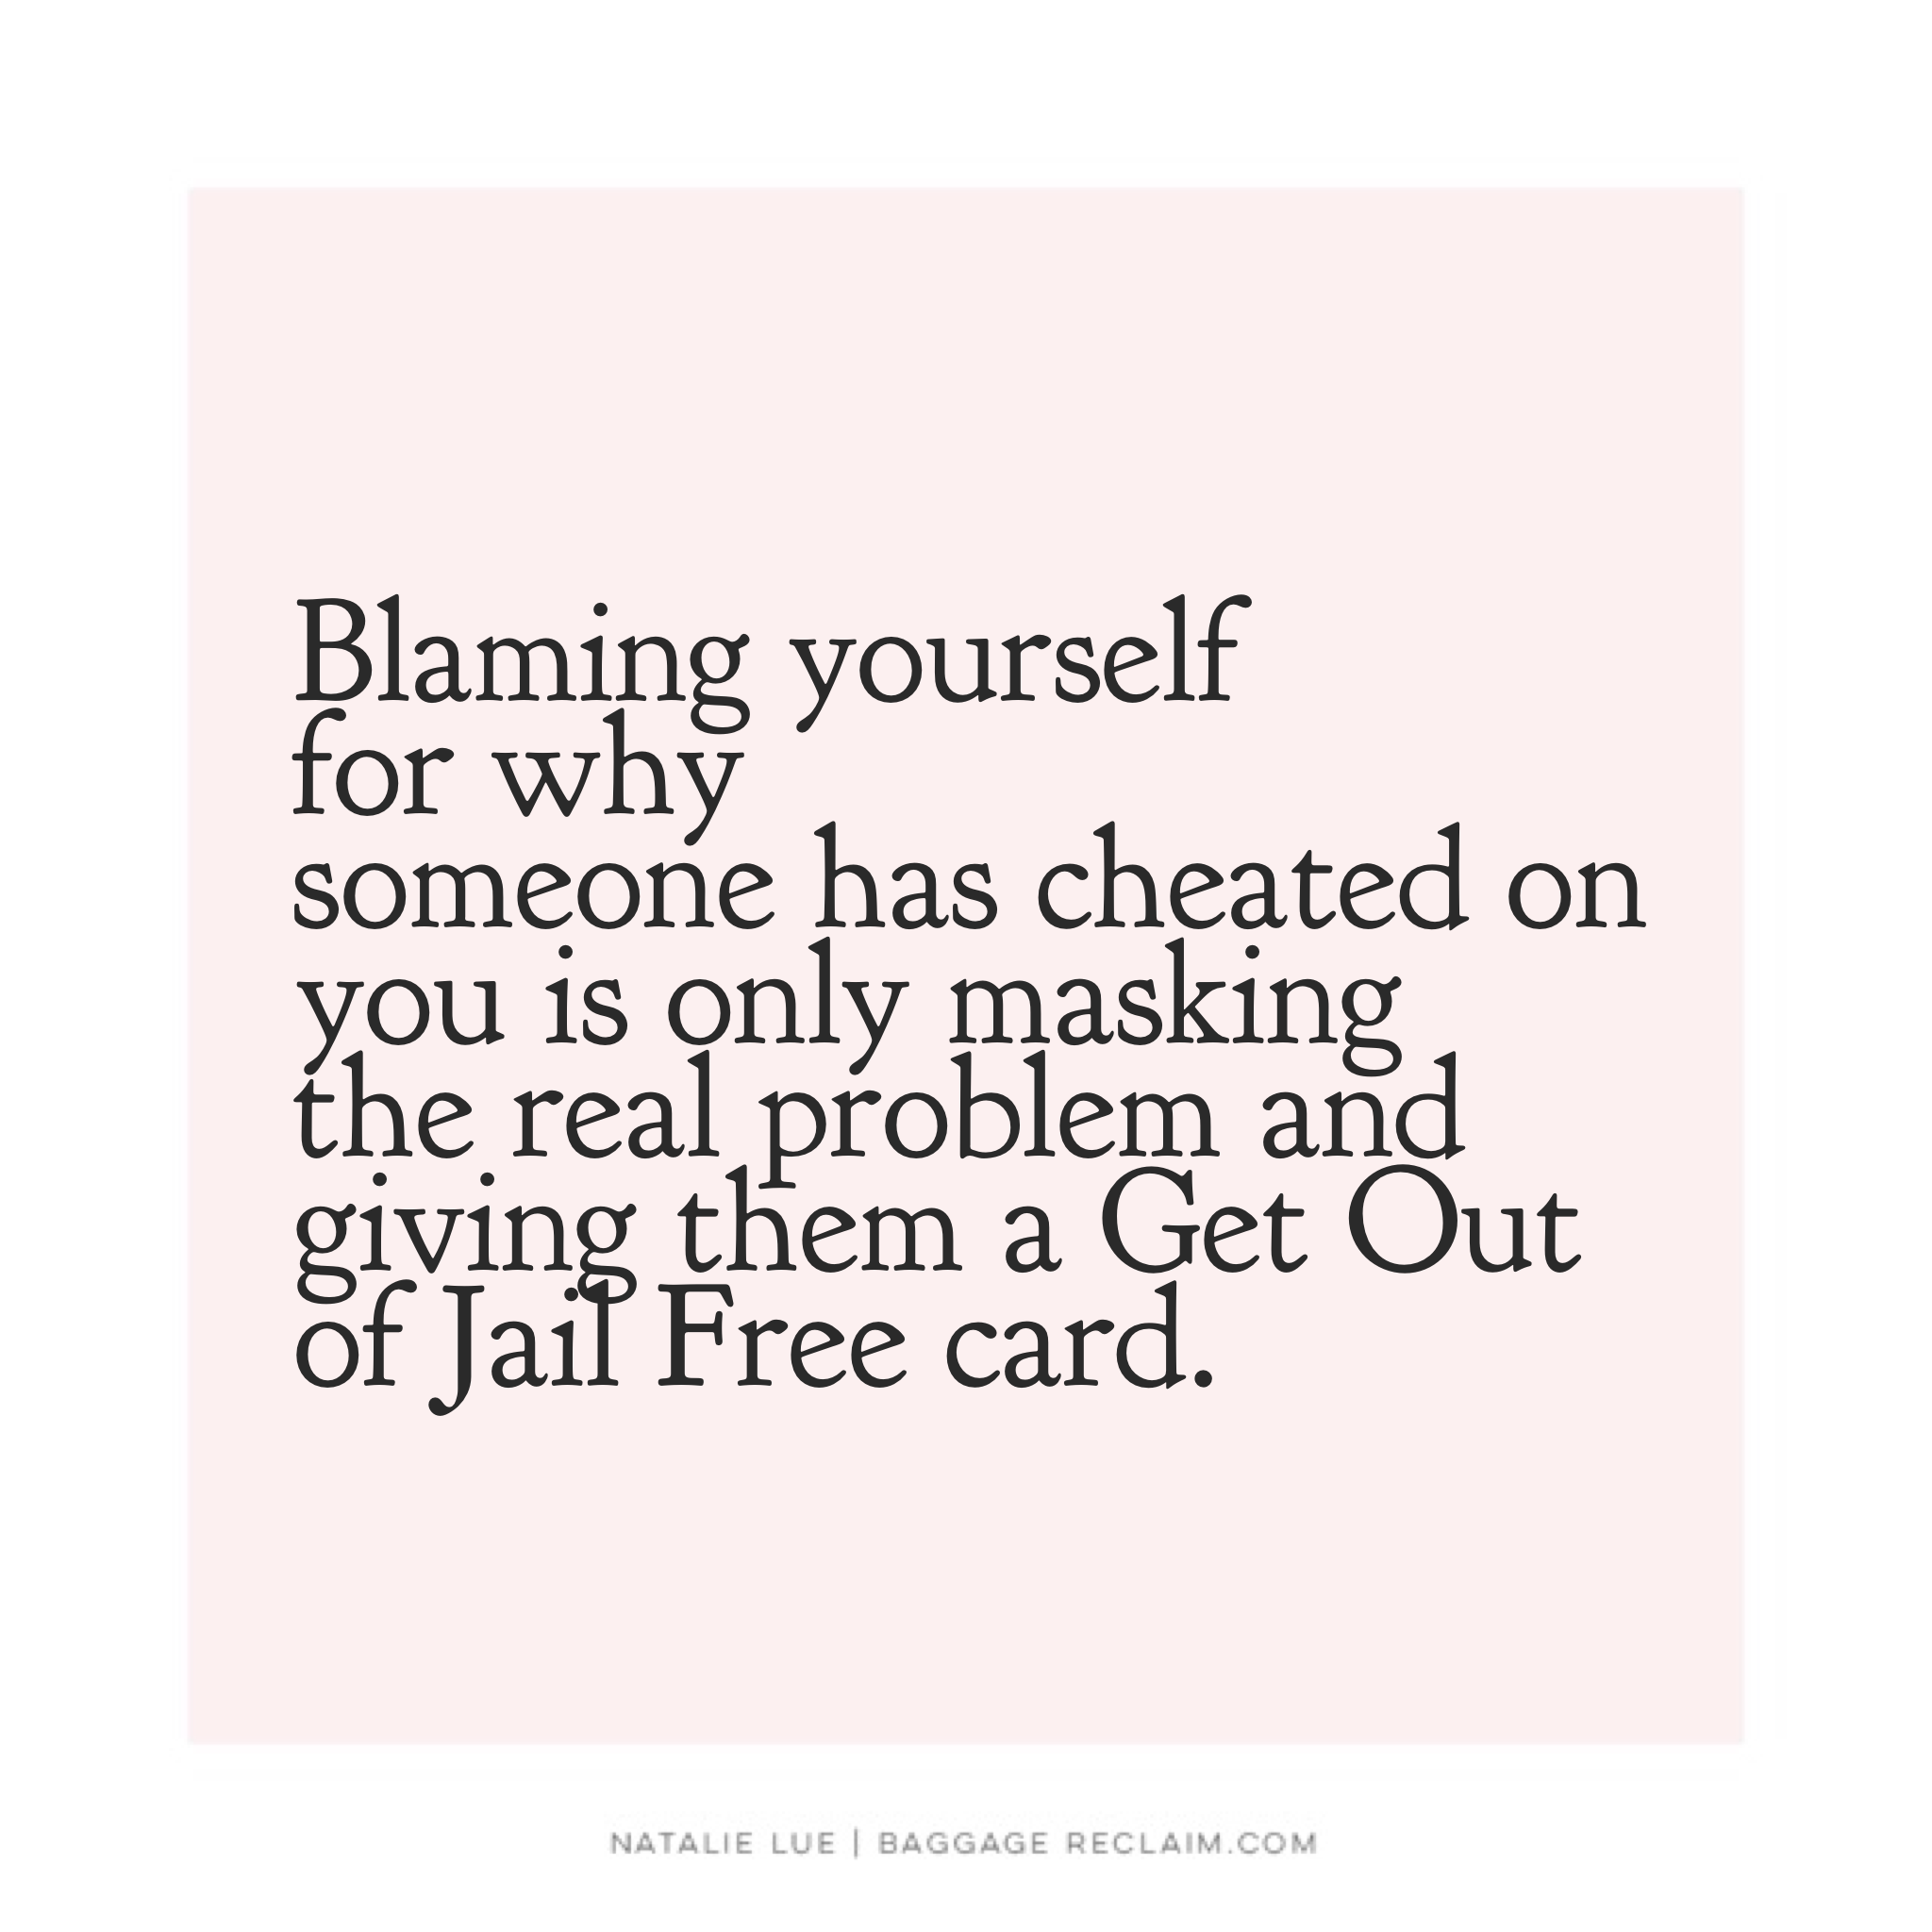 Blaming yourself for why someone has cheated on you is only masking the real problem and giving them a Get Out of Jail Free card.